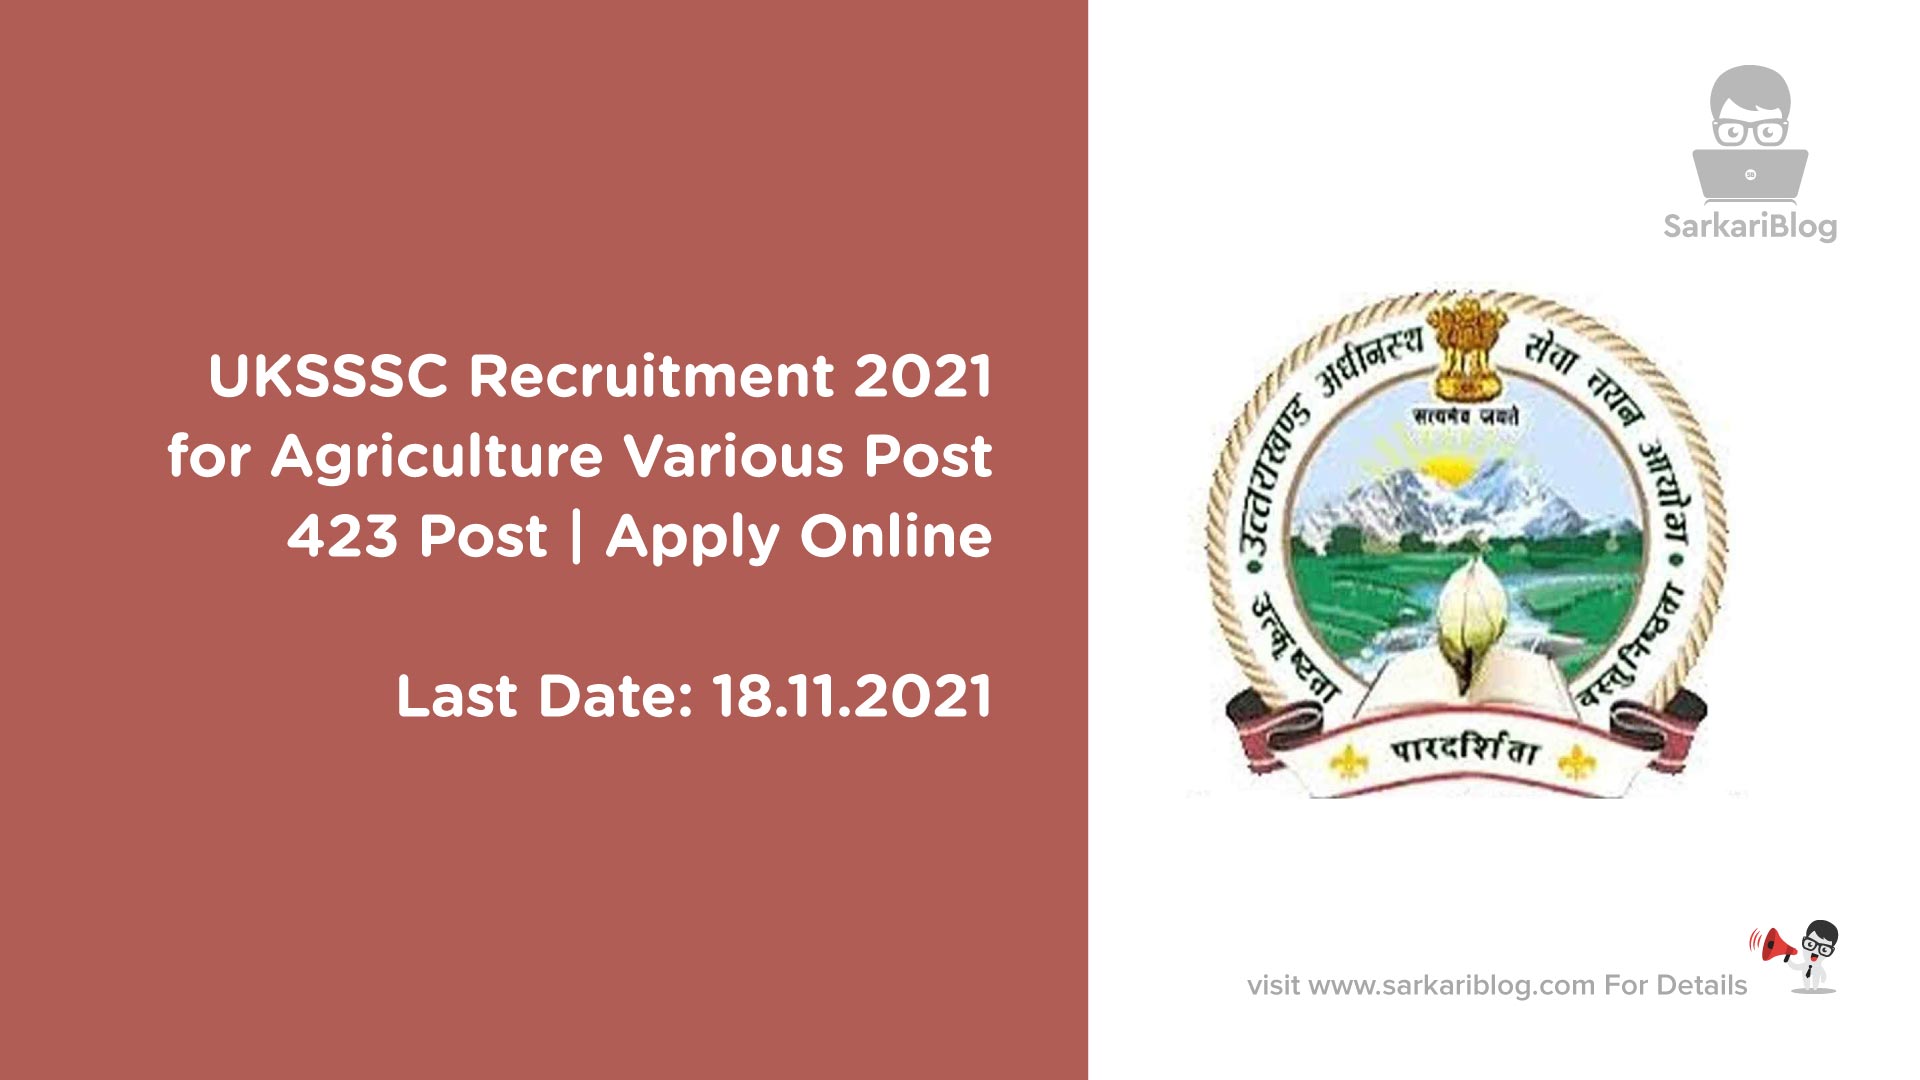 UKSSSC Recruitment 2021 for Agriculture Various Post